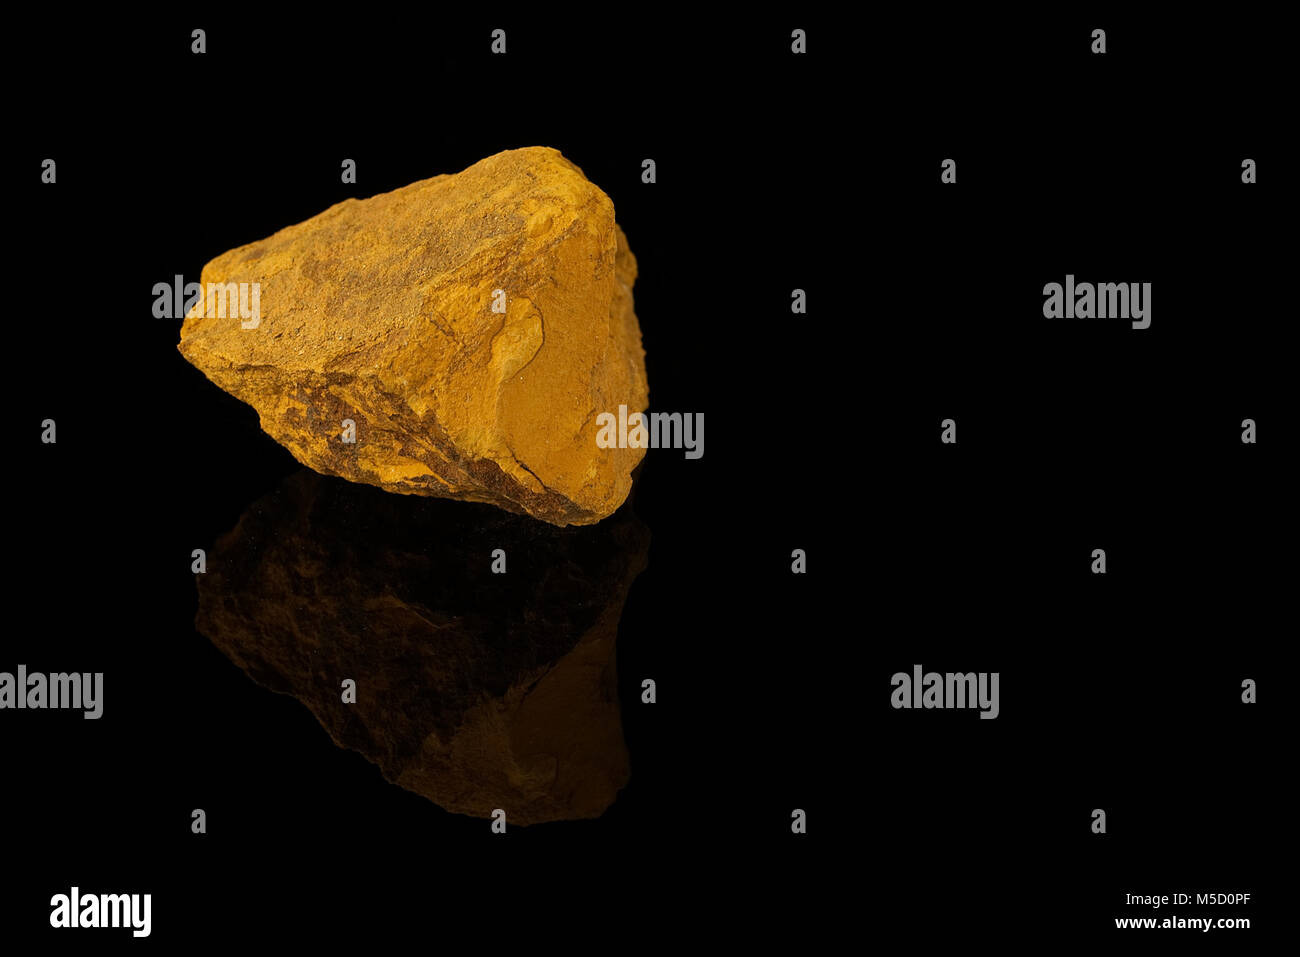 Limonite, iron ore mineral, iron oxide-hydroxide, amorphous, mineraloid, fine grained aggregate with powdery coating isolated on black background.rock Stock Photo